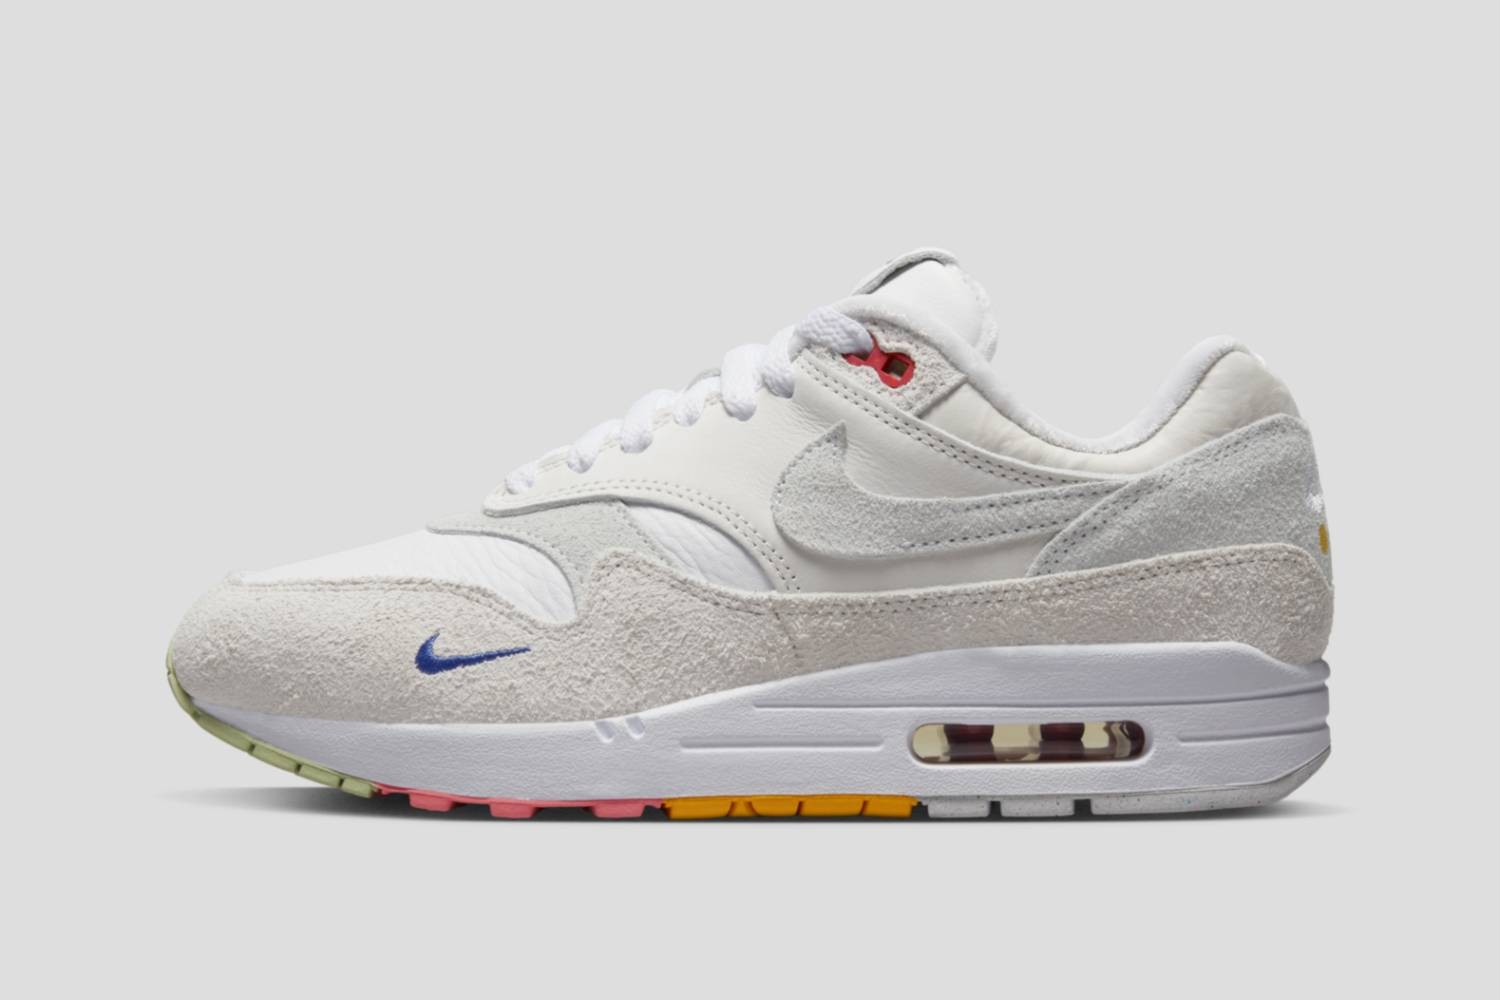 Nike arrives with an Air Max 1 'Neutral Grey' colorway